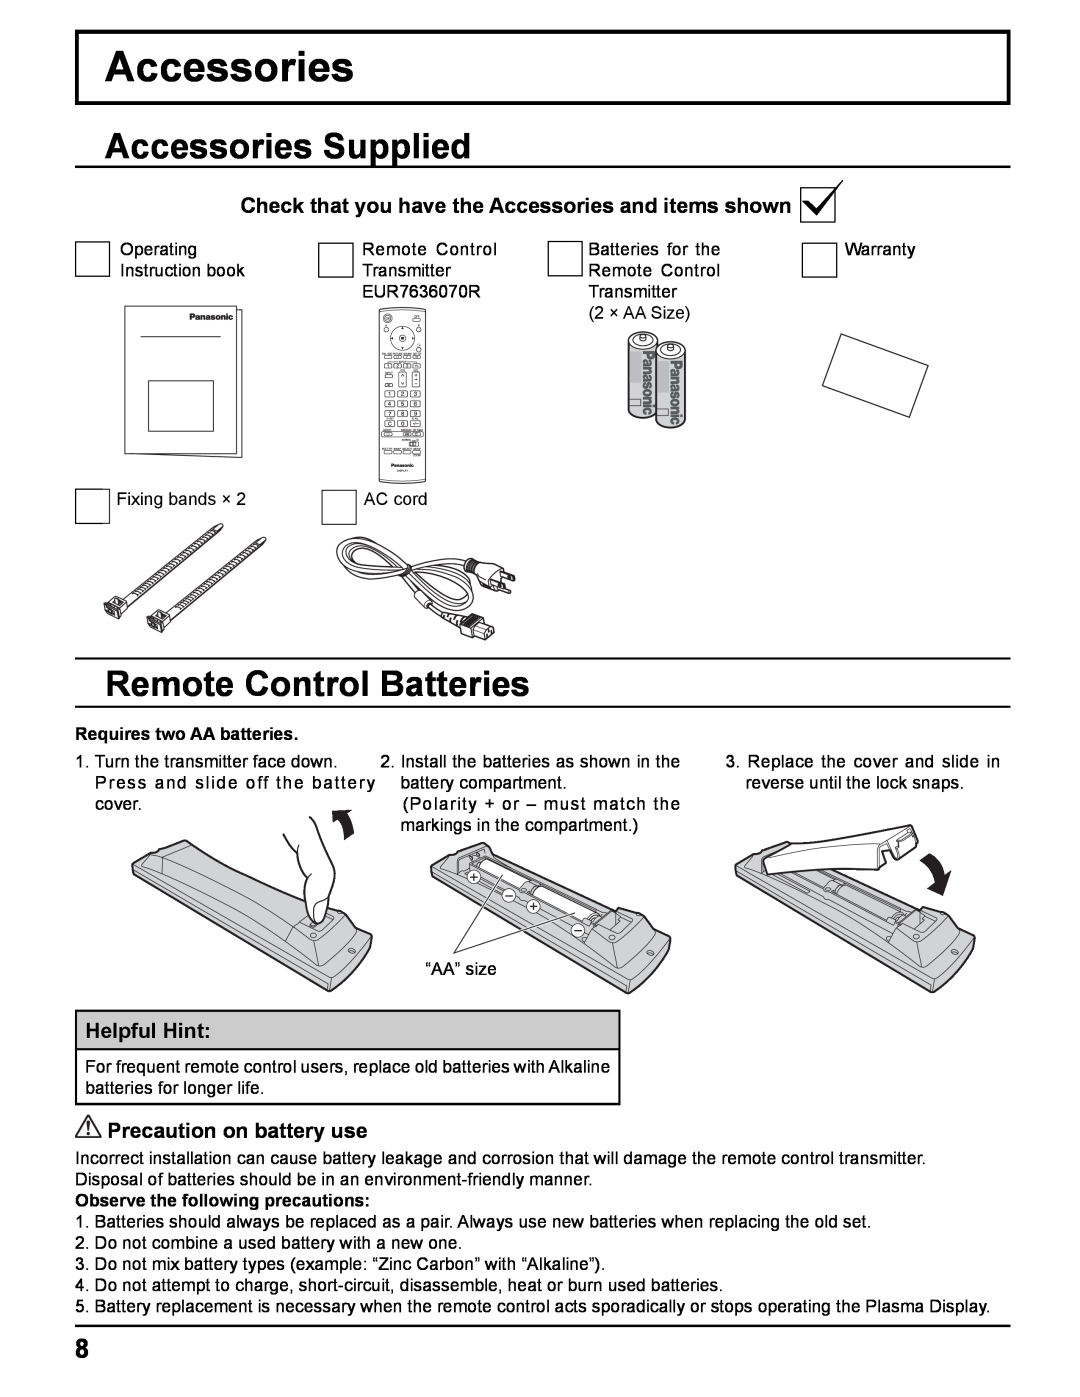 Panasonic TH-42PWD8UK manual Accessories Supplied, Remote Control Batteries, Helpful Hint, Precaution on battery use 